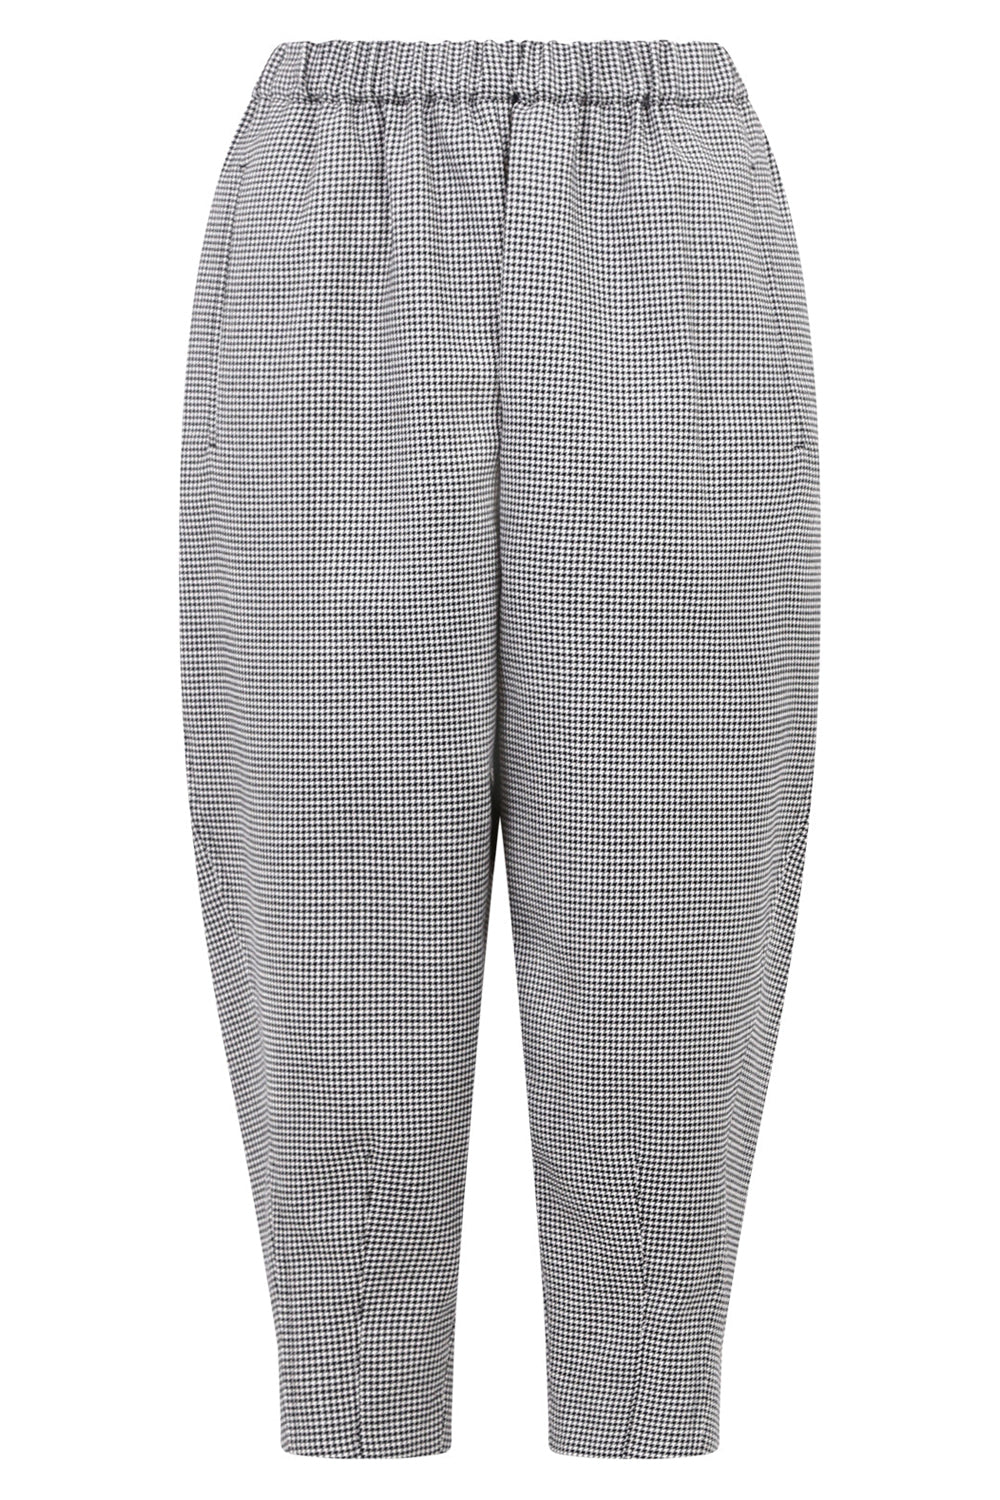 COMME DES GARCONS RTW TAPERED CUFF PANTS | HOUNDSTOOTH PRINT